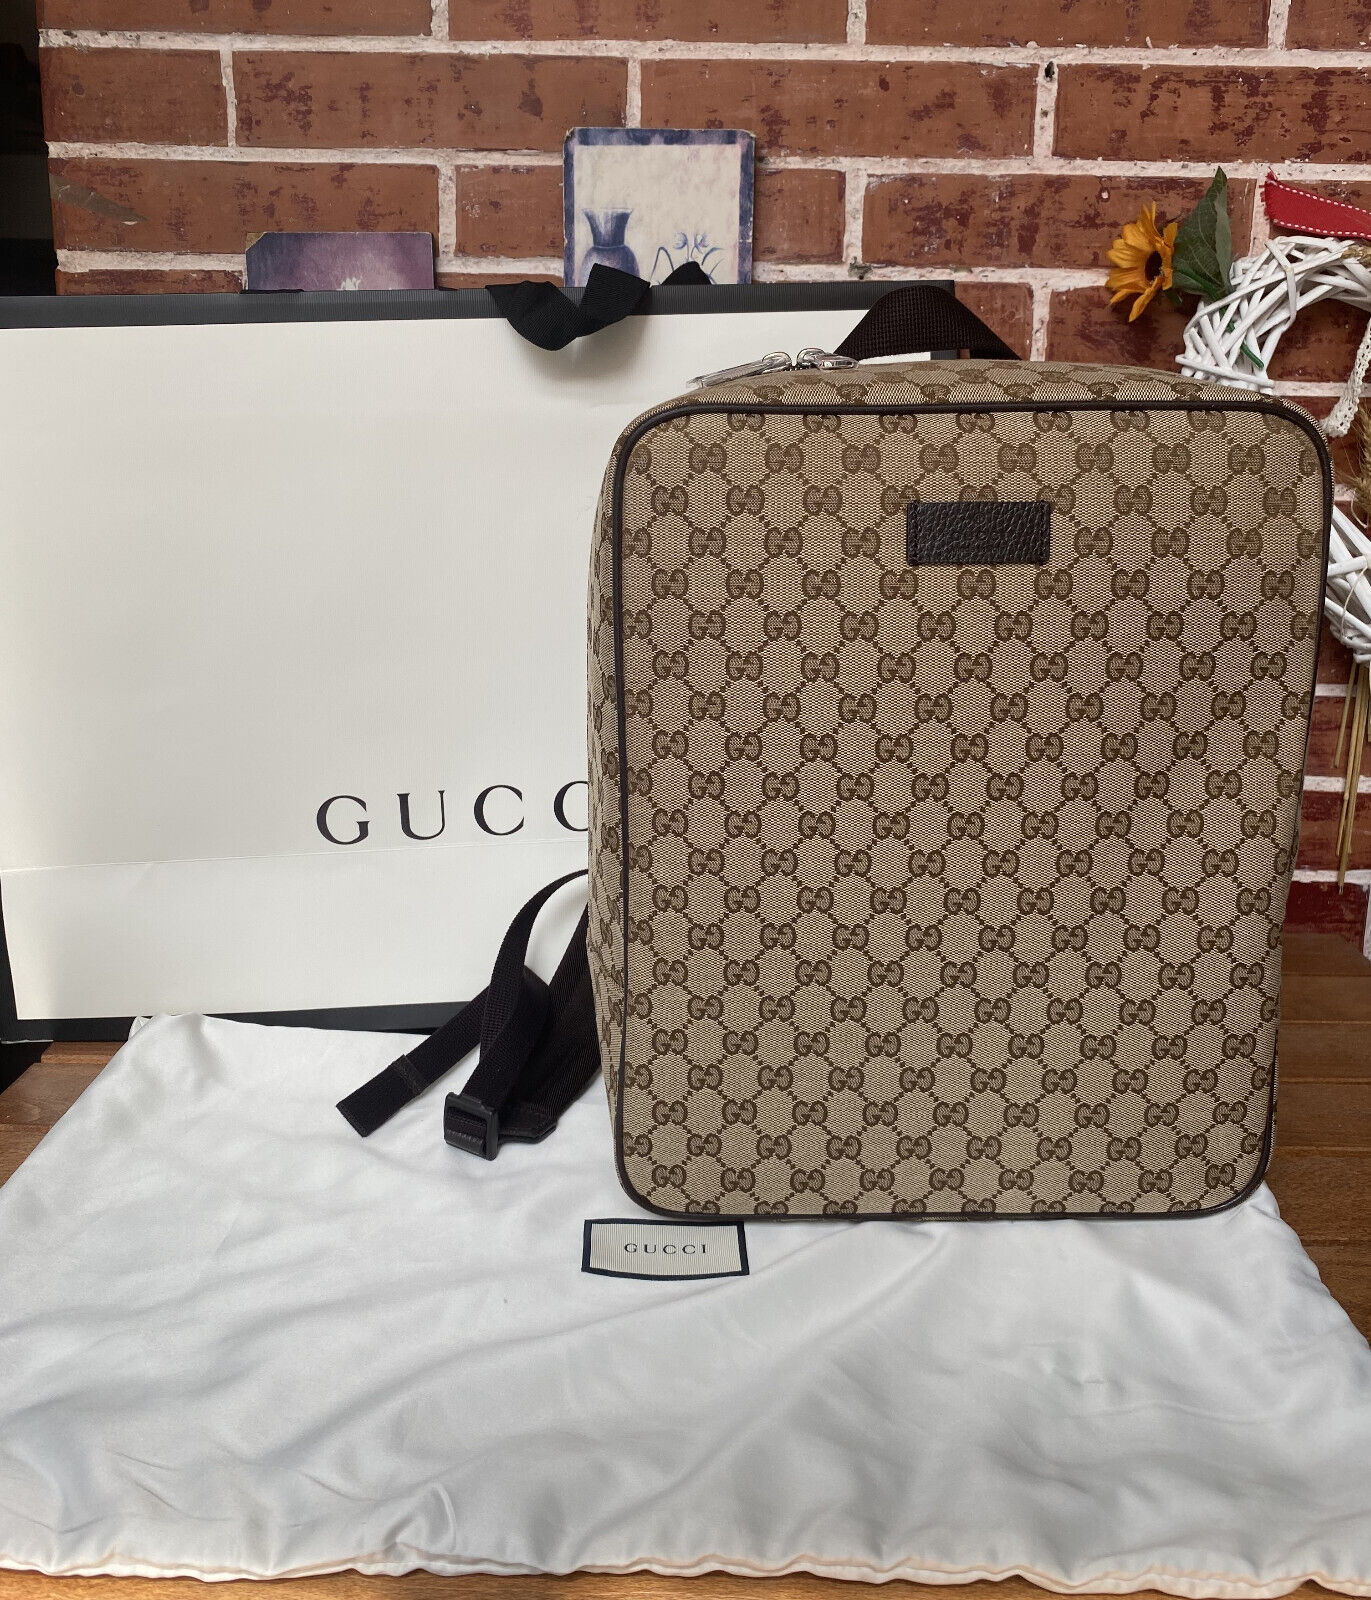 Gucci Mongramma Backpack in Canvas, authentic with box and labels in canvas.